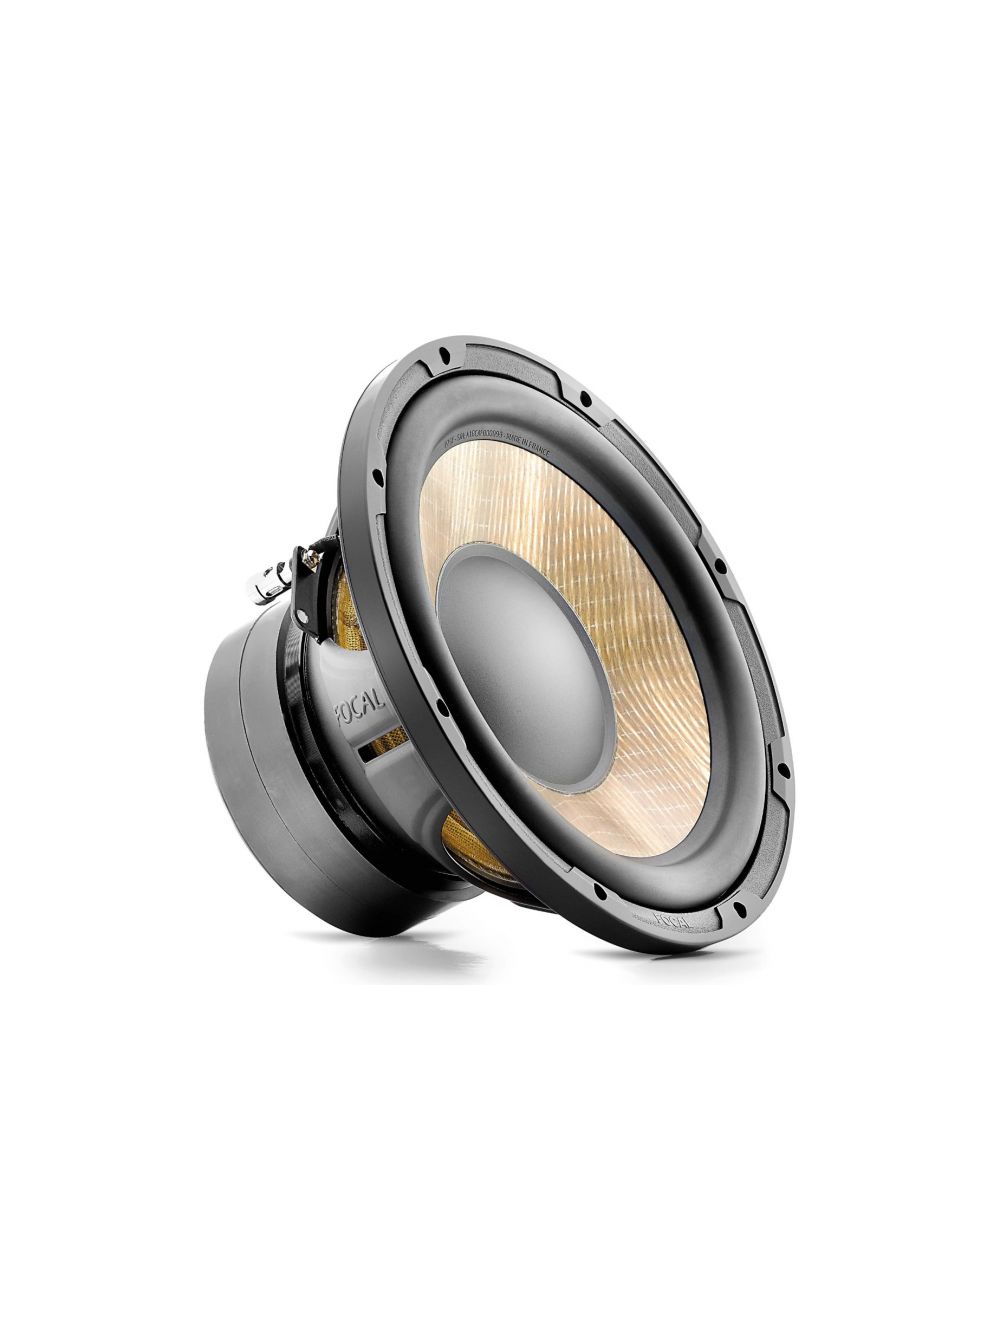 Focal SUB P 25F 10 Flax cone subwoofer, RMS: 300W - MAX: 600W